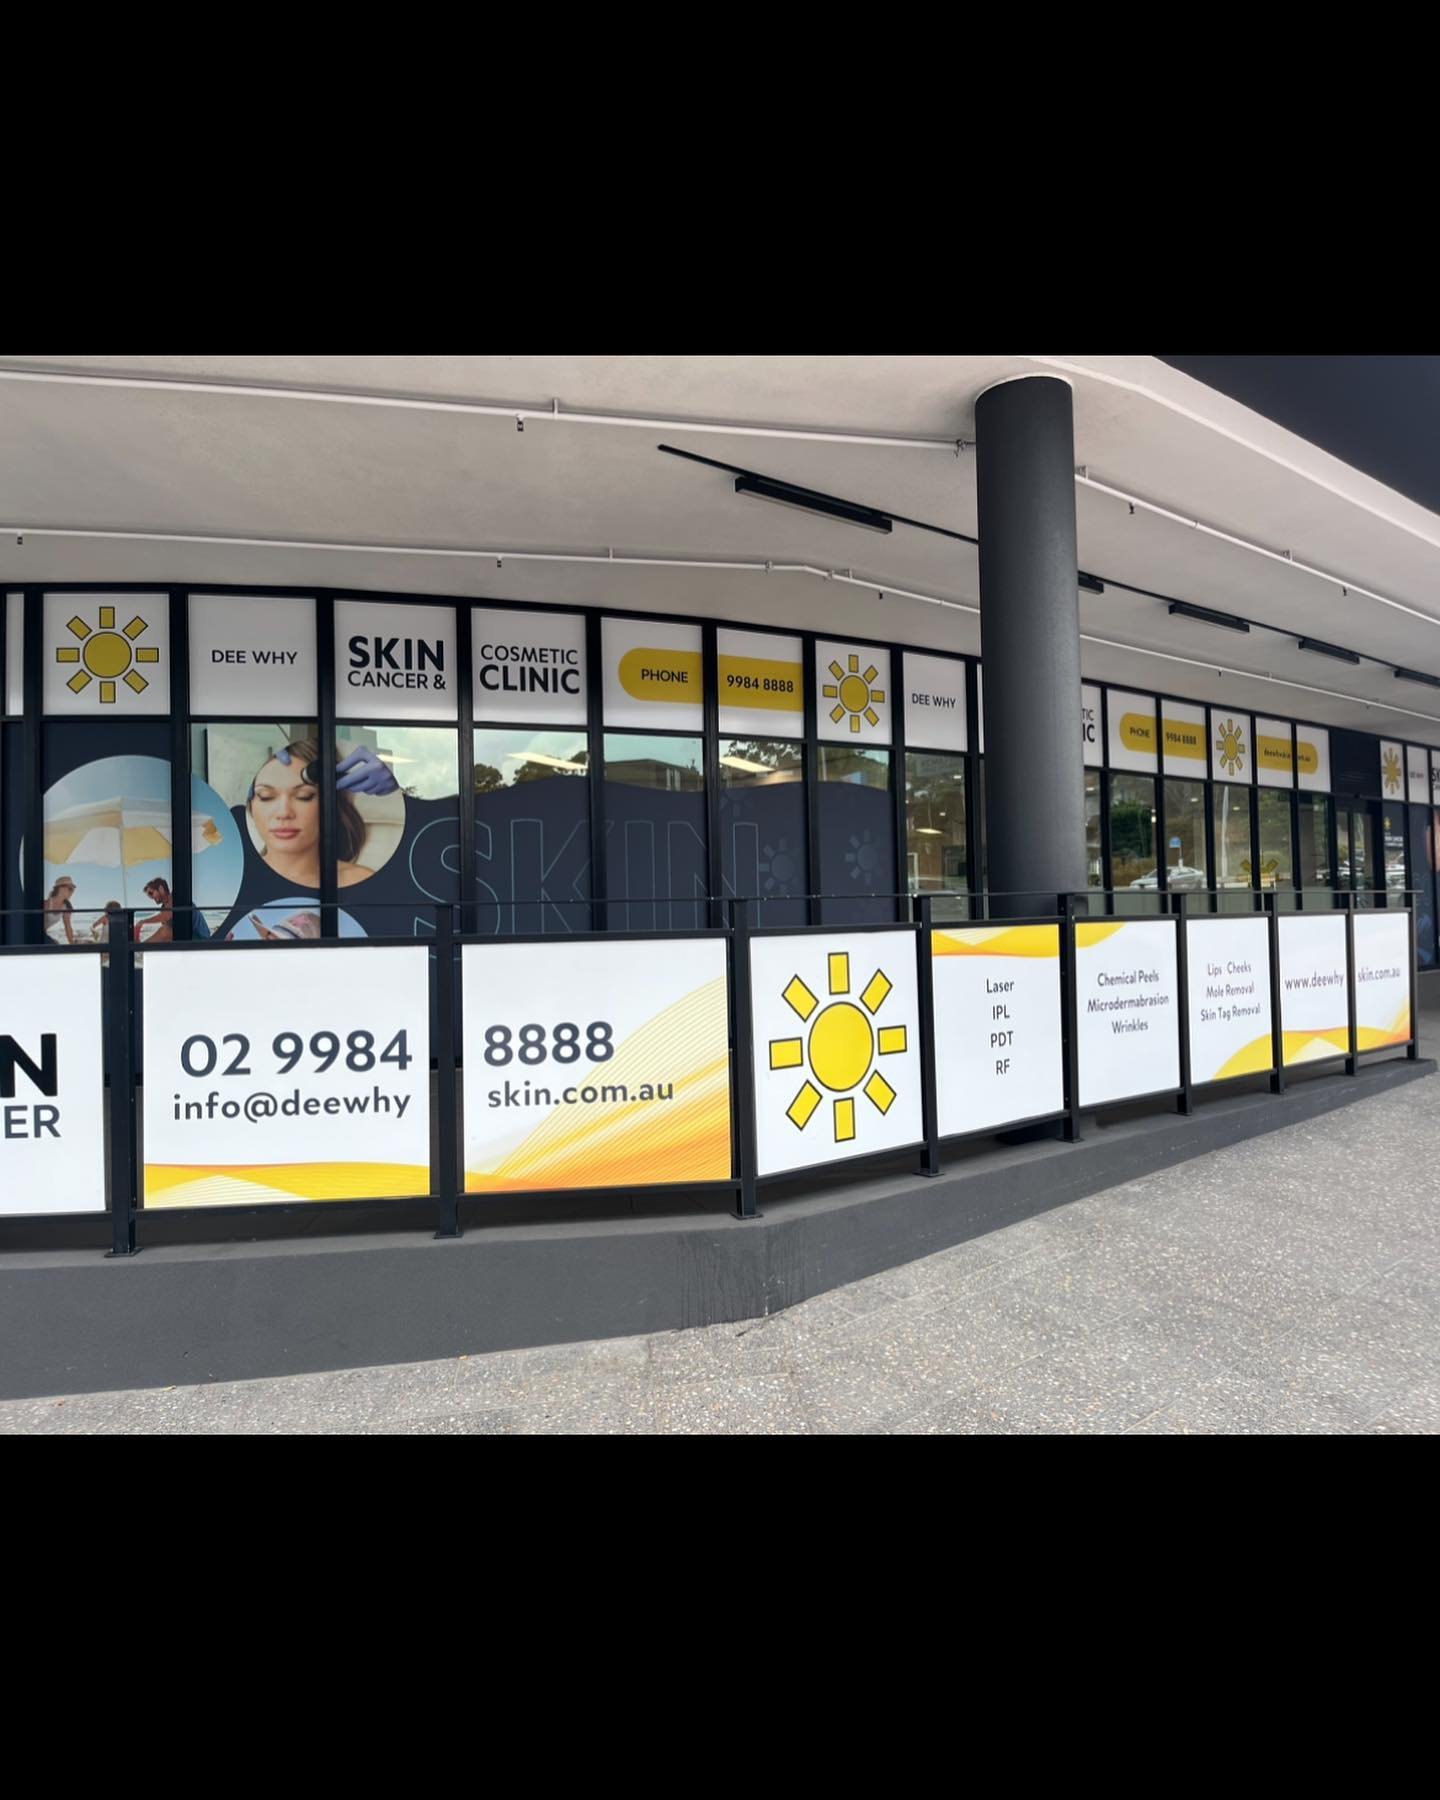 External commercial signage is a great way to show off your brand but can also be a tool for advertising to get more customers. Our latest work at Dee Why Skin Clinic has a great balance of brand while also further advertising the clinics offerings. 